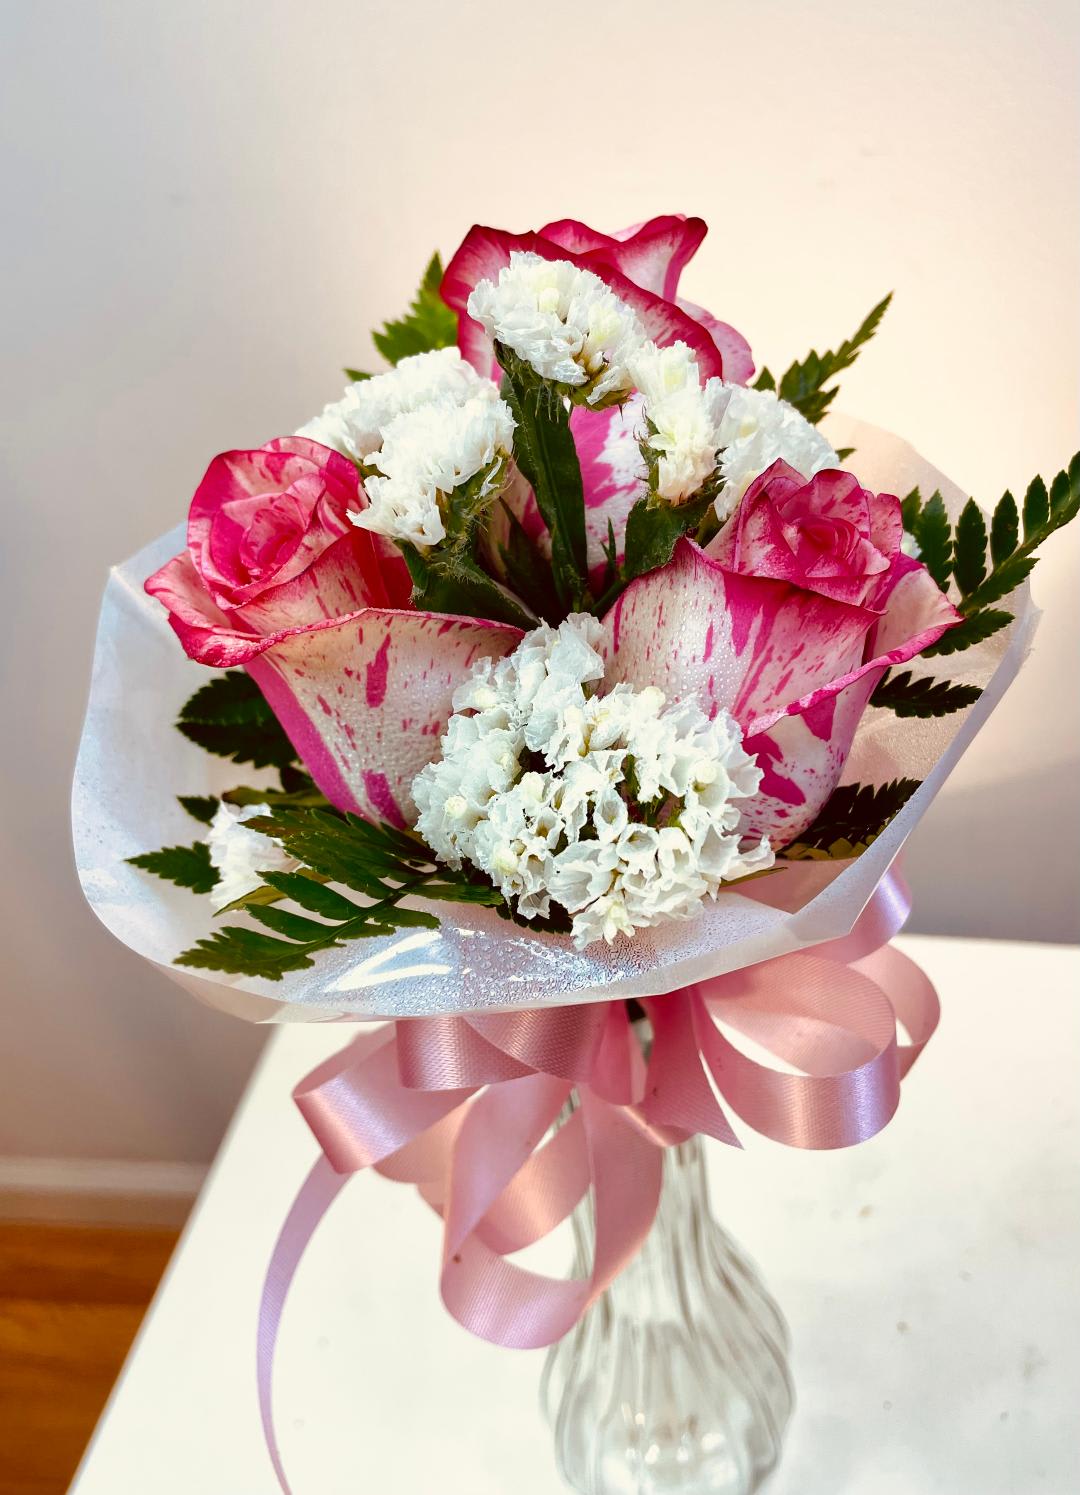 Young daughter's mini bouquet - Created for young girls attending a promotion or retirement ceremony. Very popular for the girl and family! Roses, fern,a collar and ribbon streamers resemble a tiny bridal bouquet.